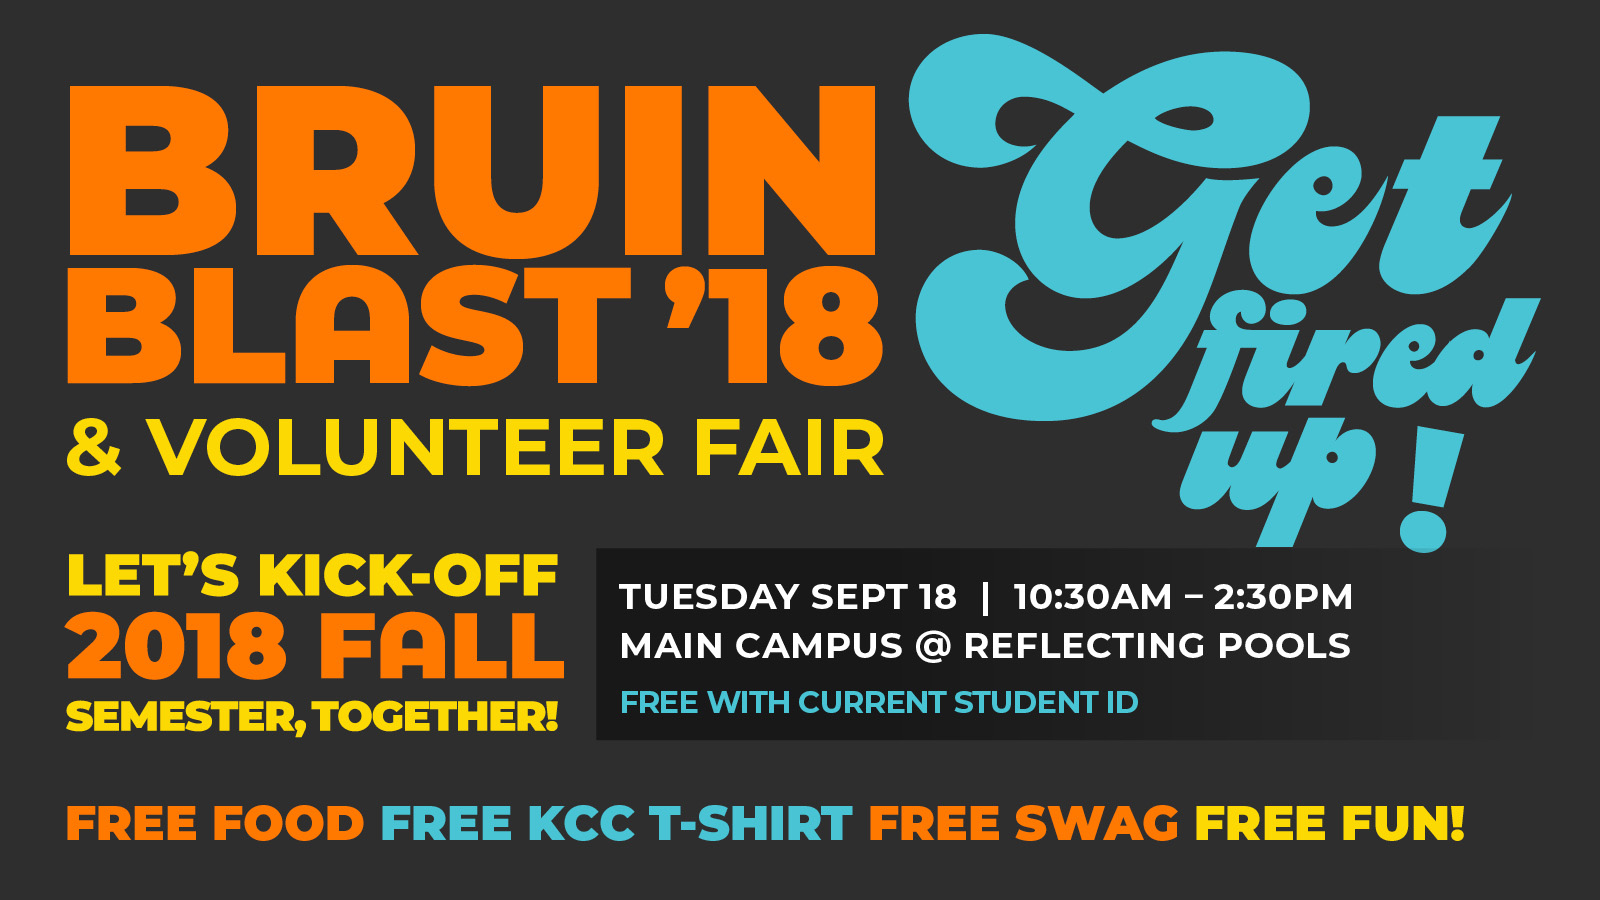 A text slide promoting KCC's 2018 Bruin Blast, scheduled for 10:30 a.m. to 2:30 p.m. Sept. 18 on the North Avenue campus in Battle Creek.